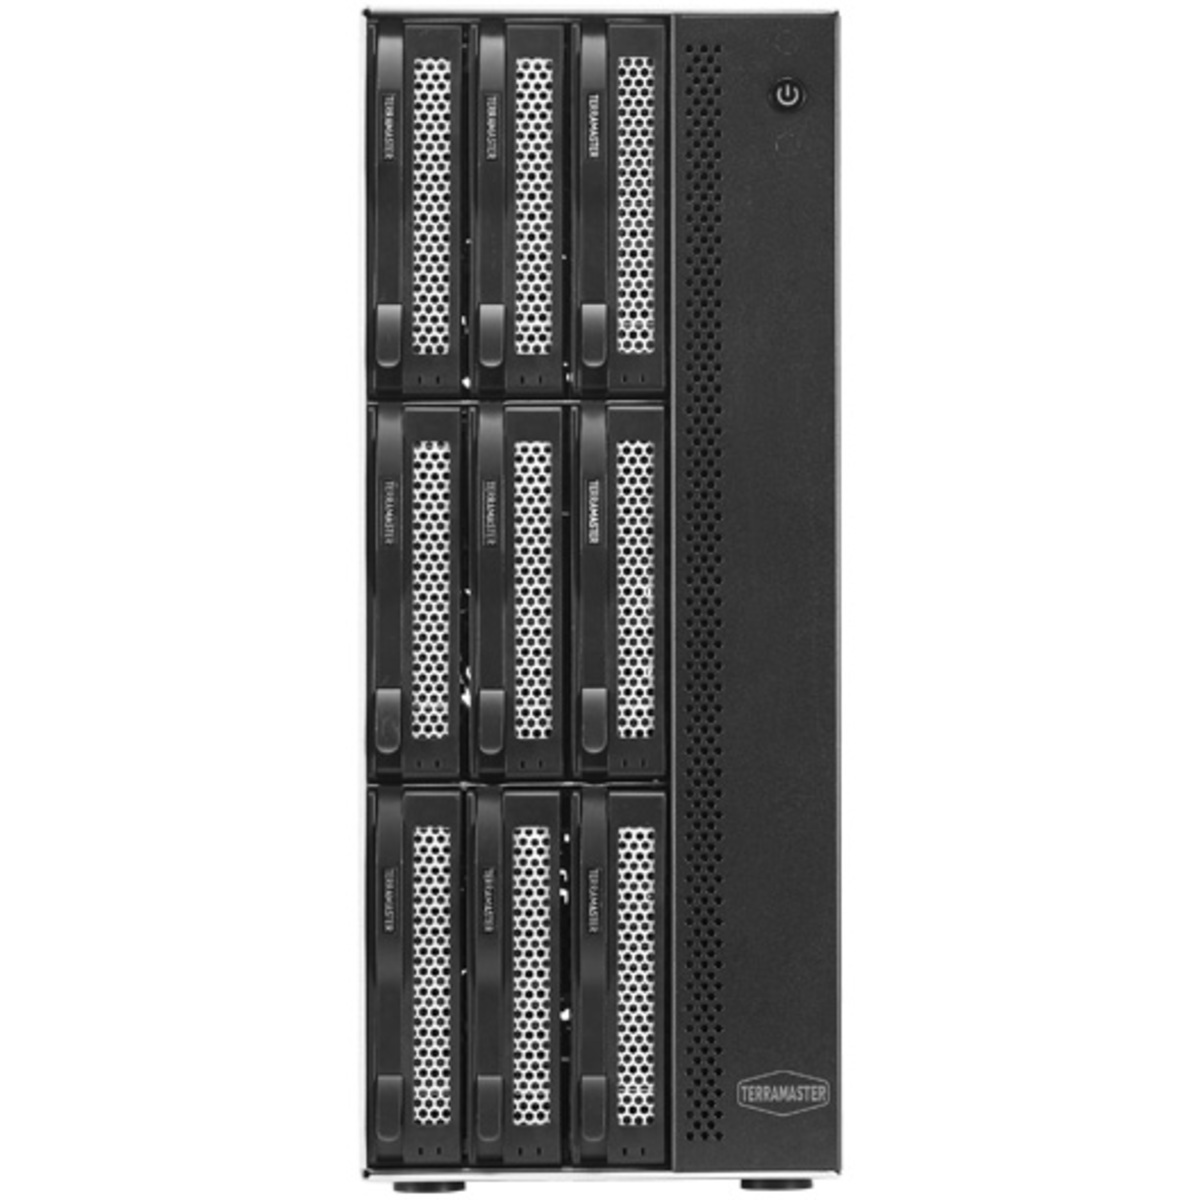 TerraMaster T9-450 40tb 9-Bay Desktop Multimedia / Power User / Business NAS - Network Attached Storage Device 5x8tb Seagate BarraCuda ST8000DM004 3.5 5400rpm SATA 6Gb/s HDD CONSUMER Class Drives Installed - Burn-In Tested T9-450